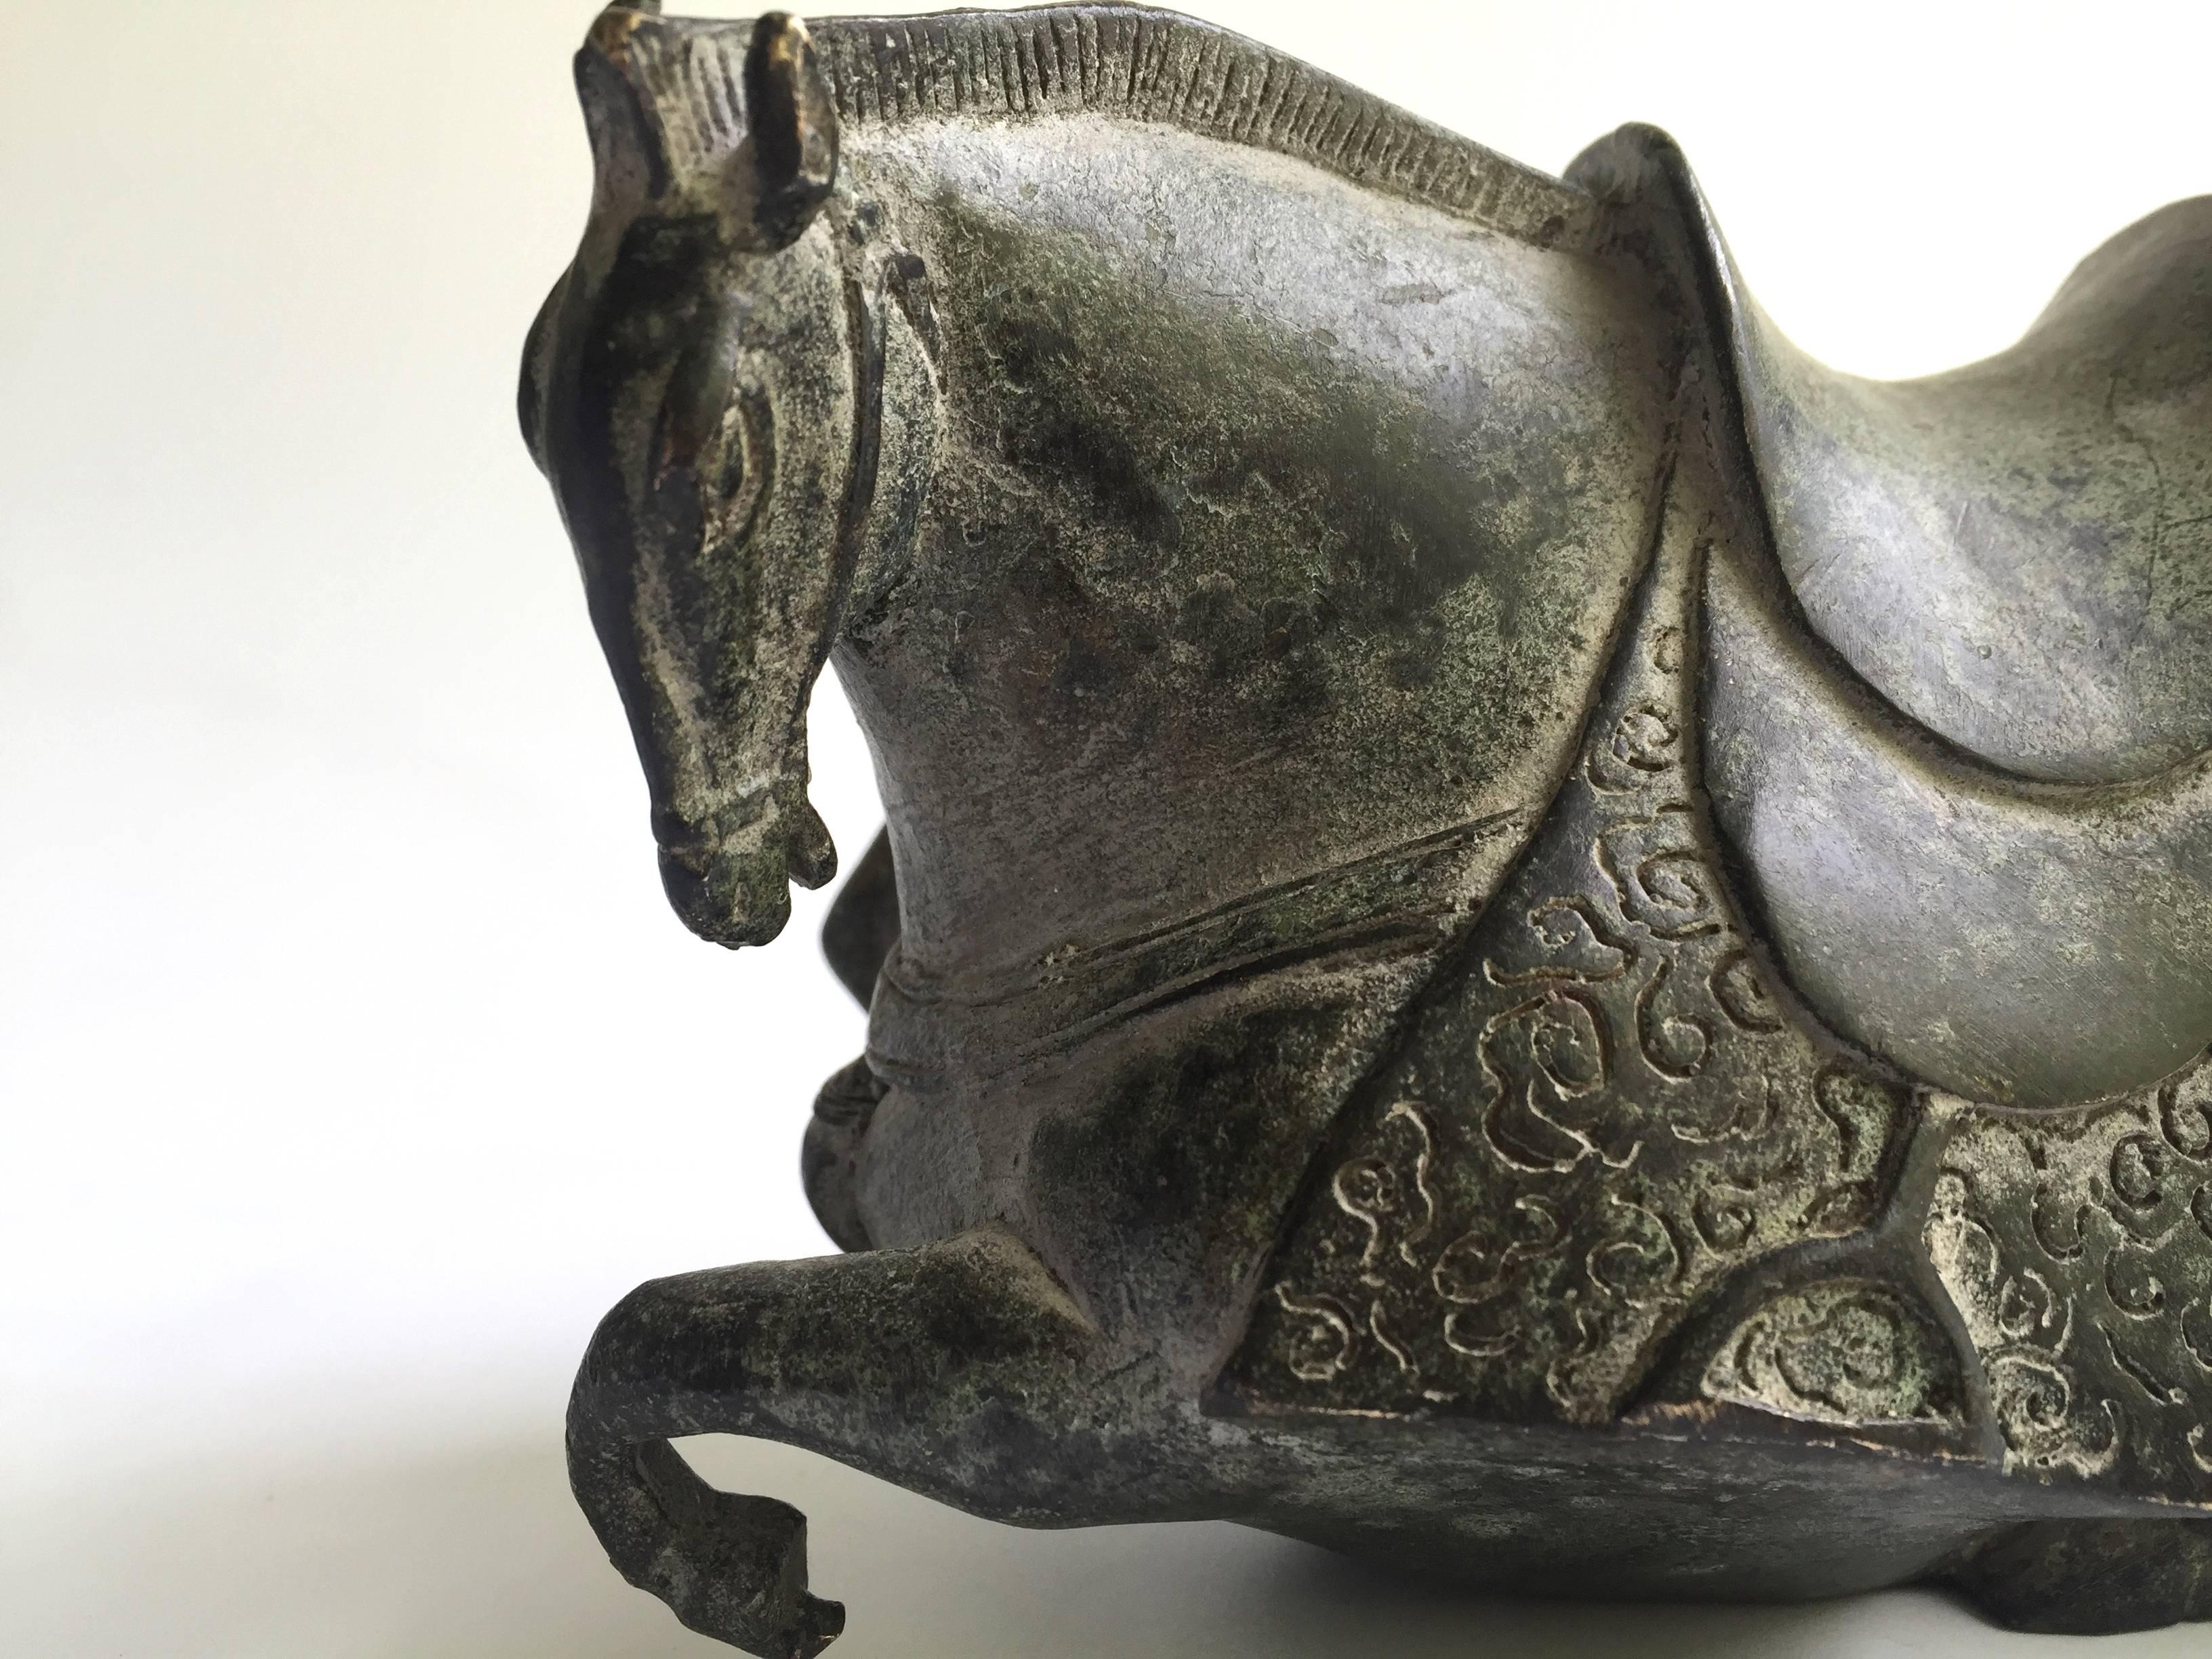 Exquisite bronze horse in Han style. The craftsmanship is superb with outstanding artistic expression. The scale and proportions of the horse's body follow an ancient model that has an almost modern feel to it. The muscles are well defined and